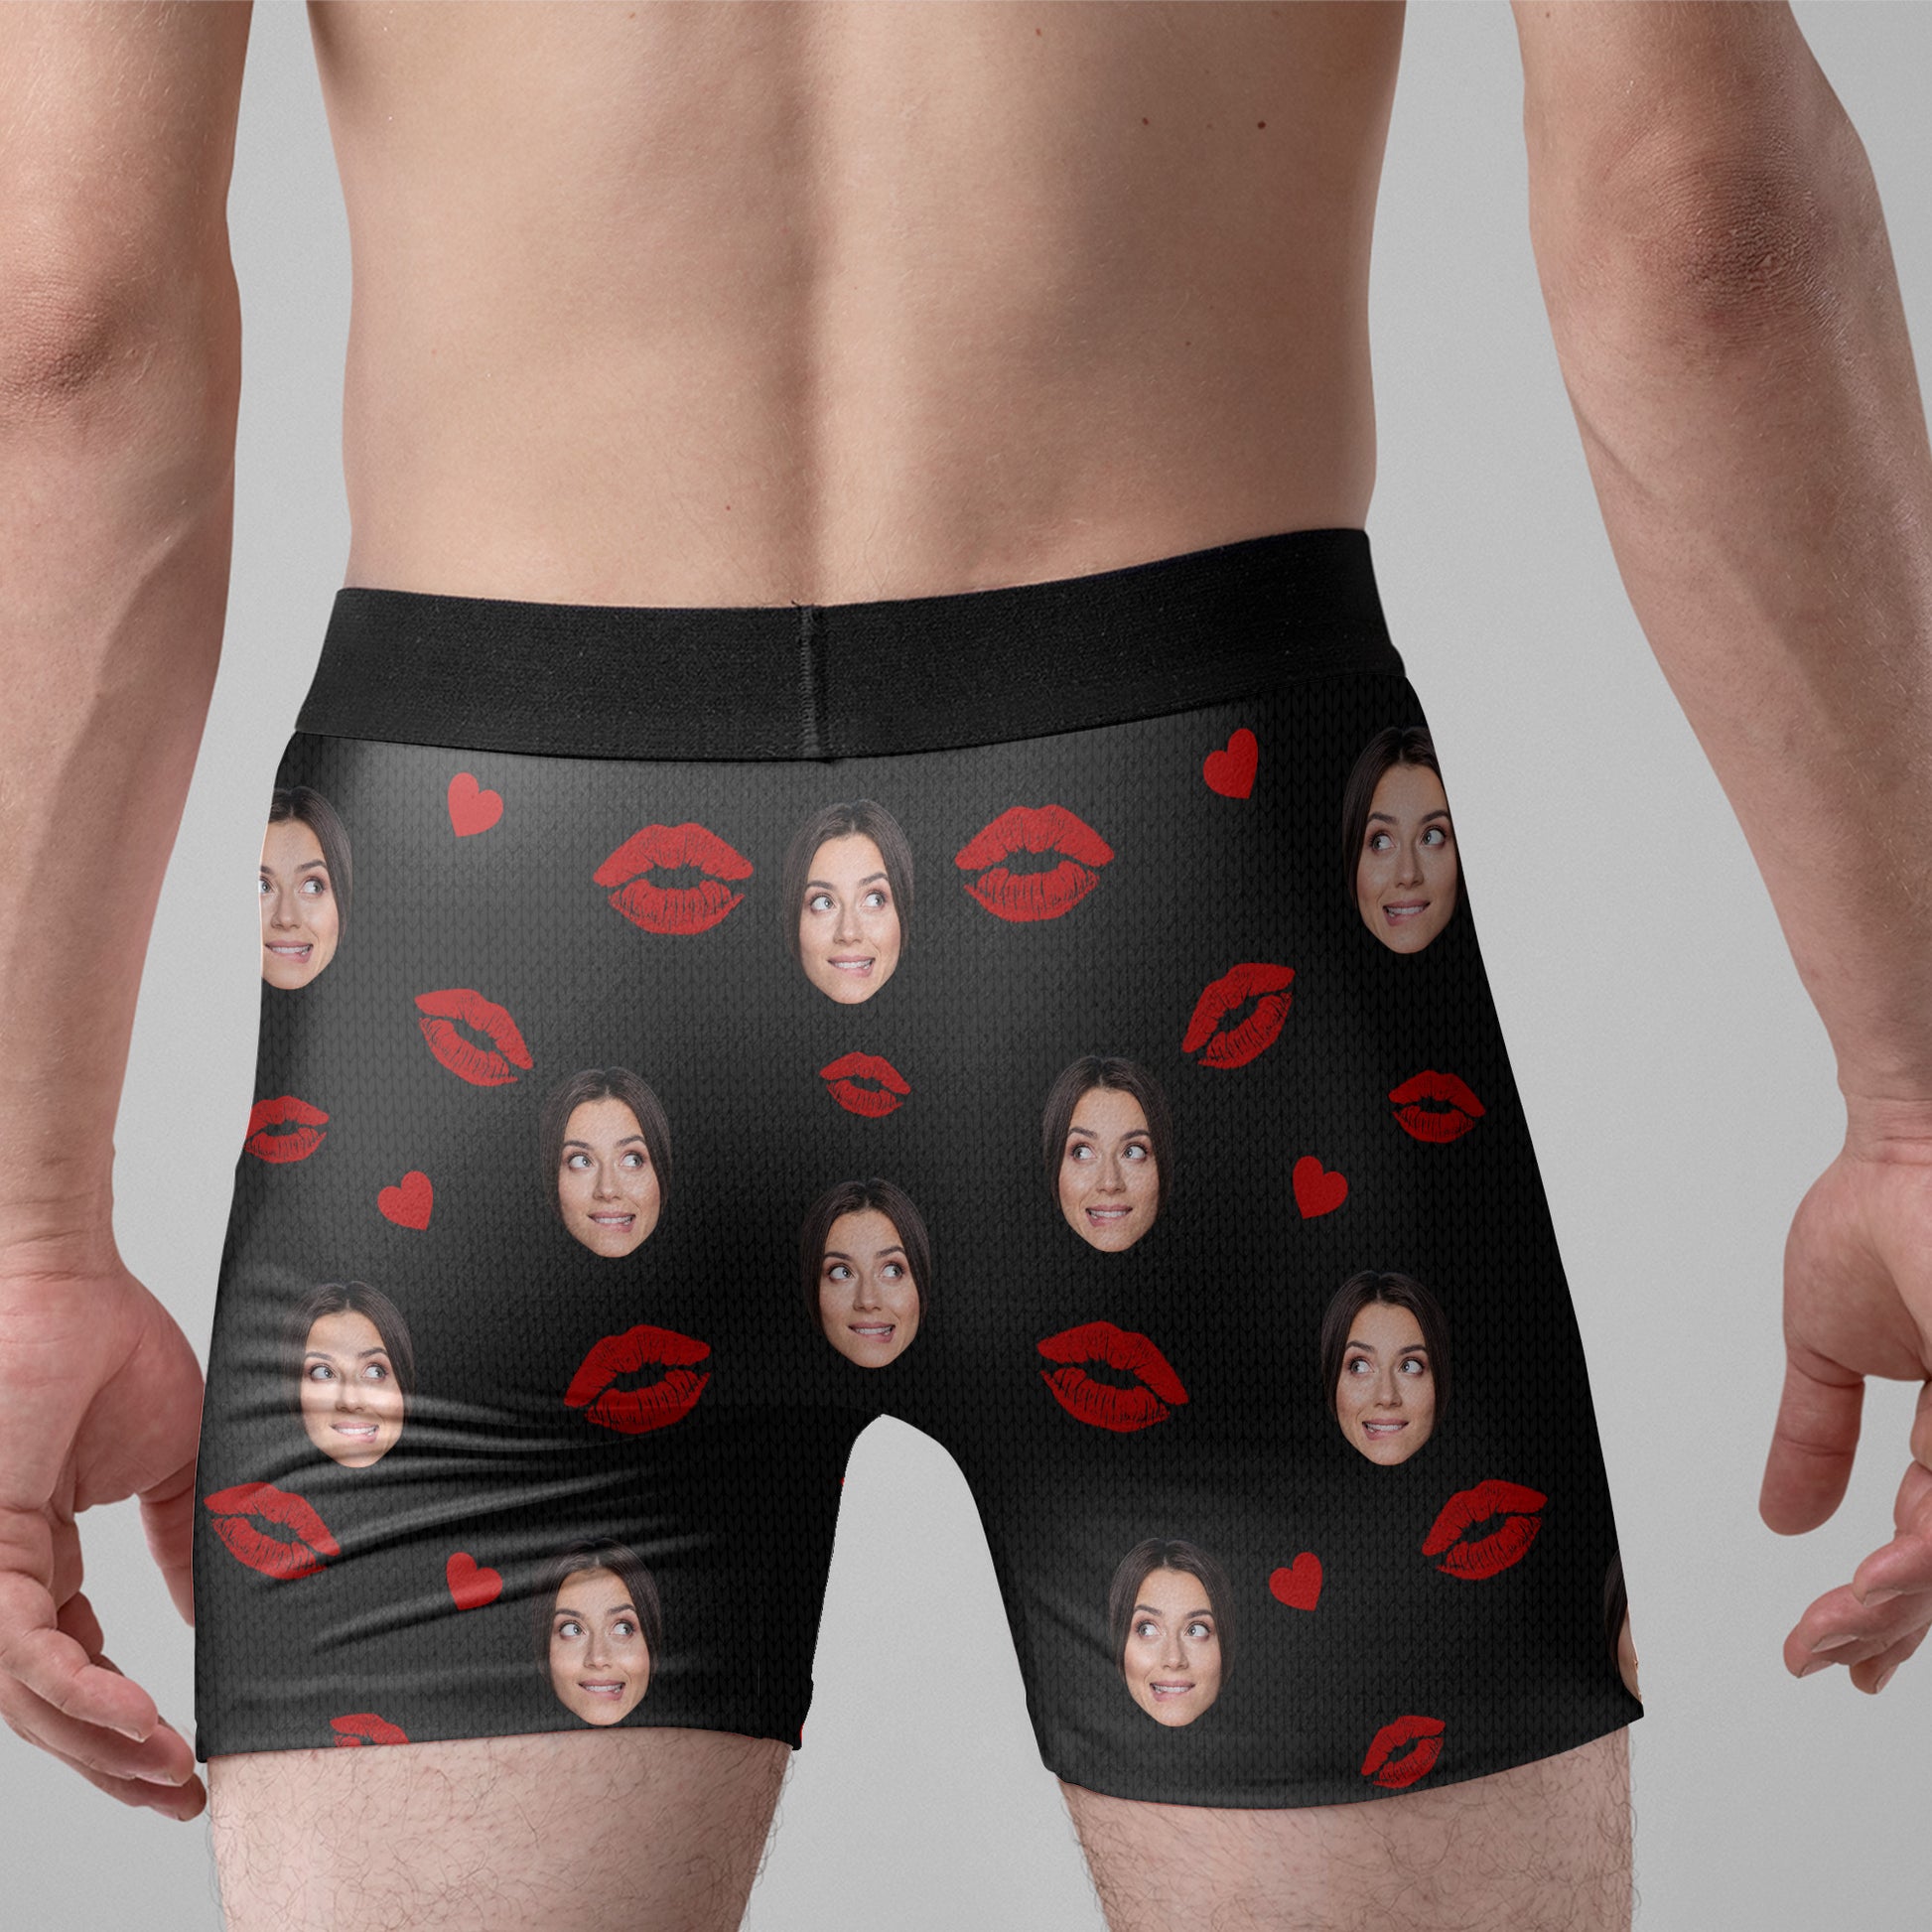 This Is The Best Thing I'Ve Ever Found - Personalized Photo Men's Boxer Briefs